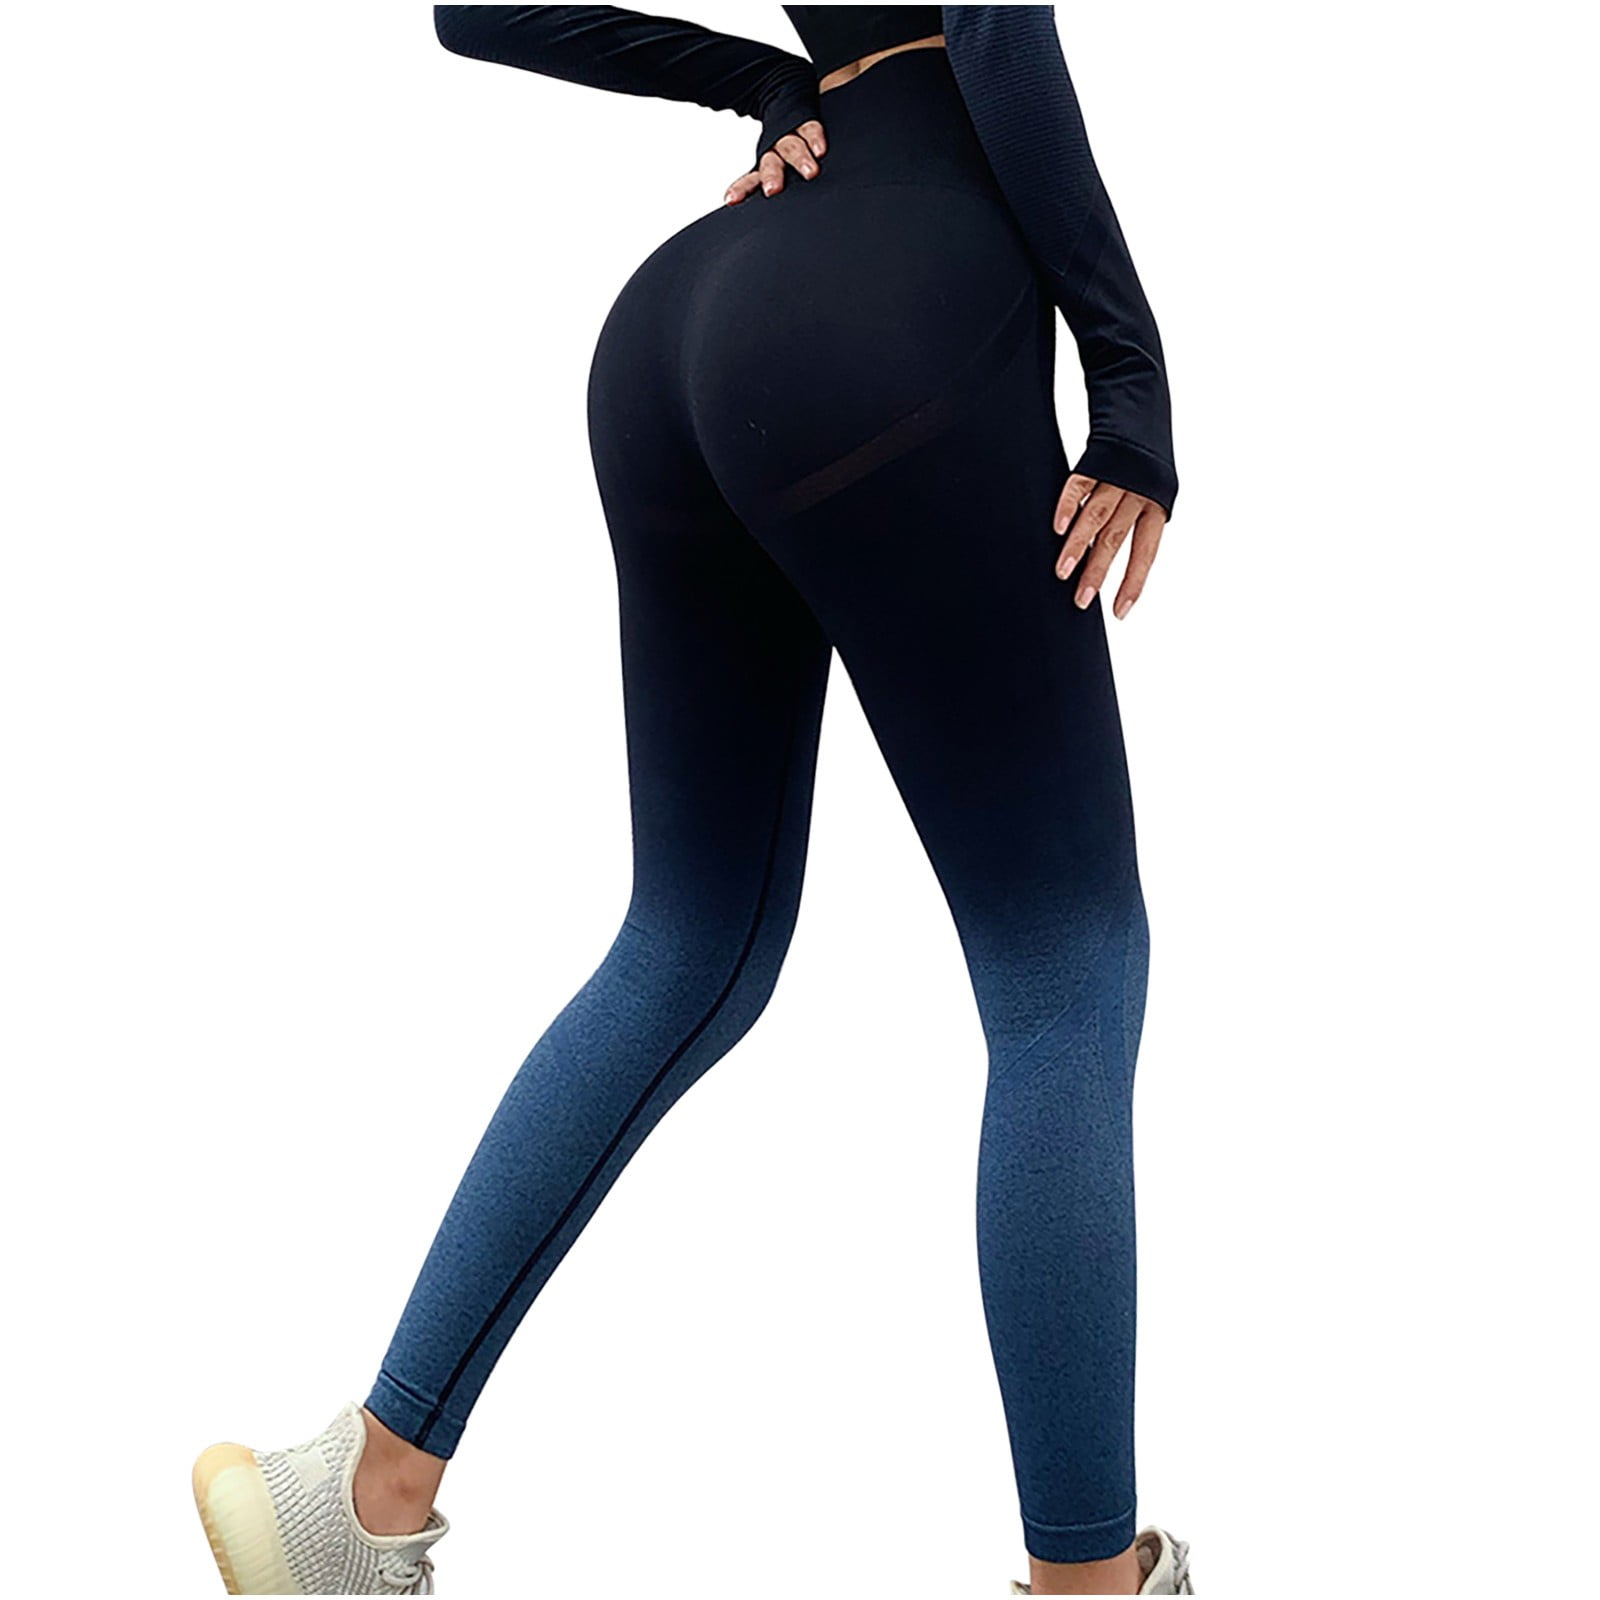 Leggings Womens Crossover Leggings In Multiple Colors No Awkward Lines Women  Hip Stretchy Tights Sports Pants Running Fitnes3298 From 25,52 €